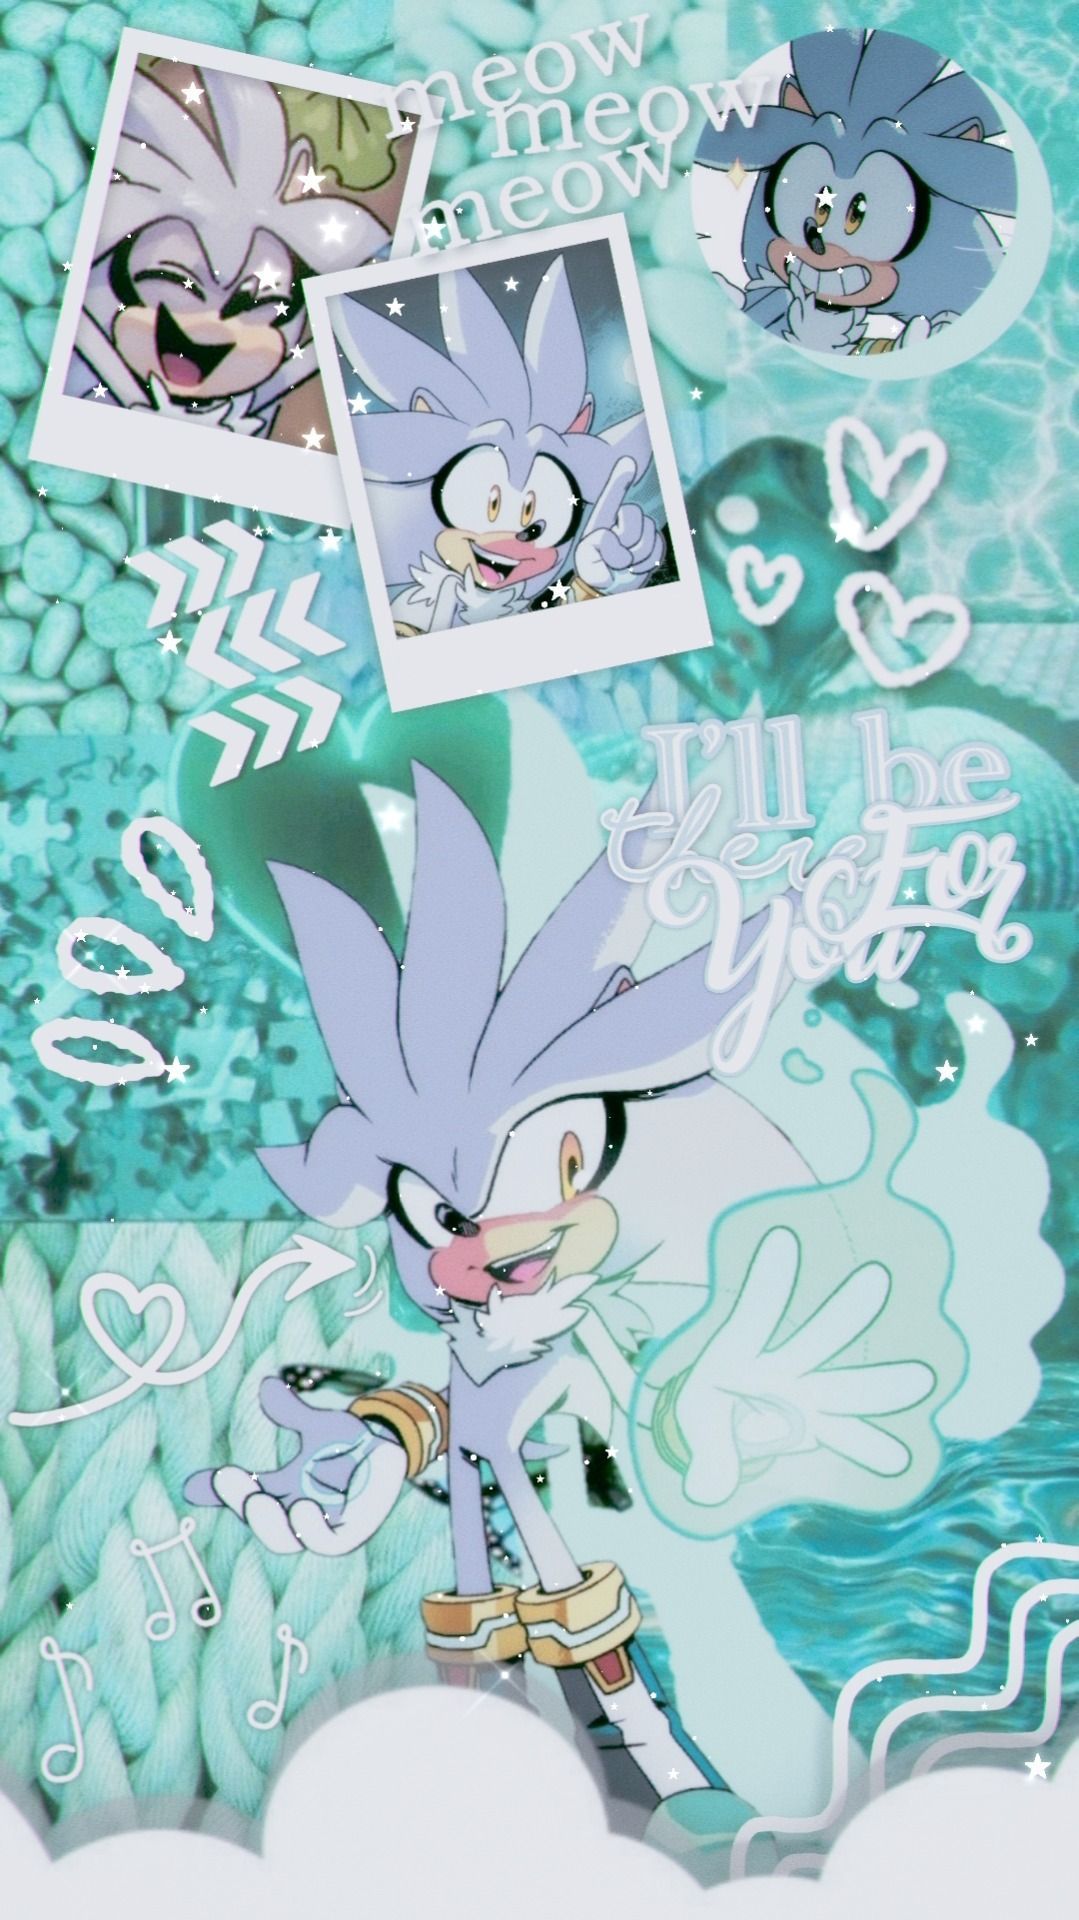 IPhone wallpaper with images of Sonic the Hedgehog and Silver the Hedgehog - Sonic, silver